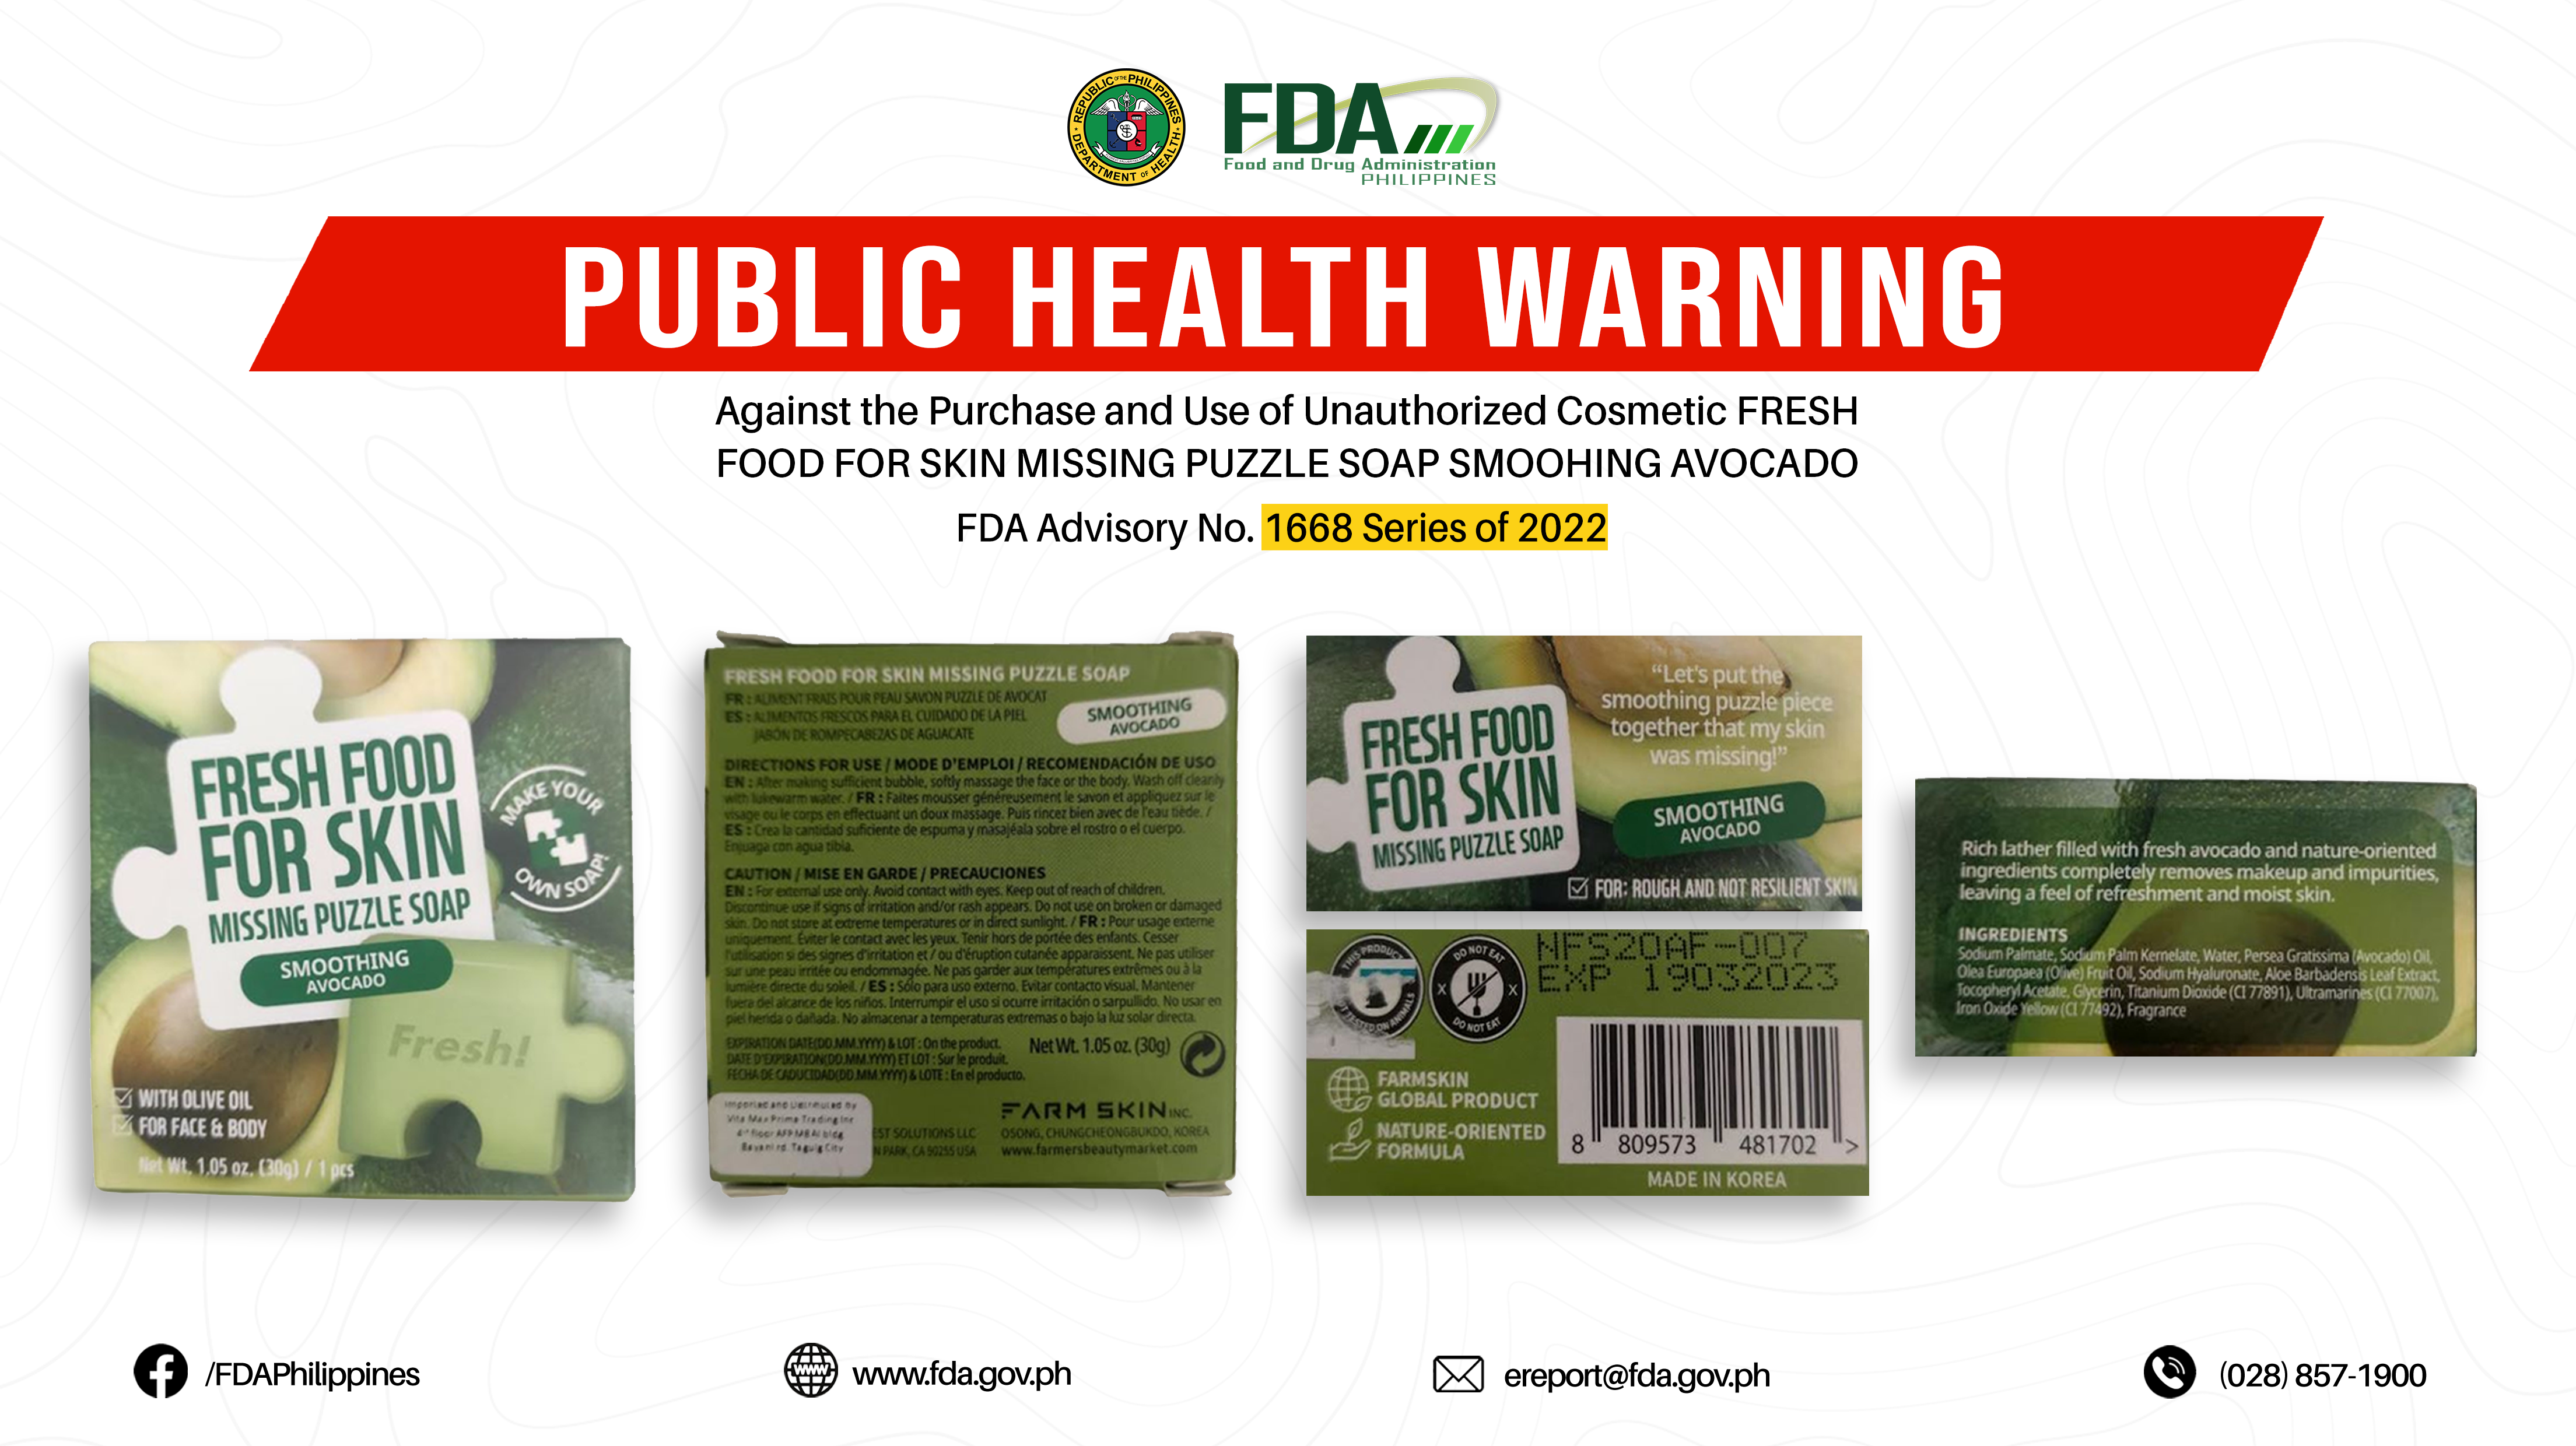 FDA Advisory No.2022-1668 || Public Health Warning Against the Purchase and Use of Unauthorized Cosmetic FRESH FOOD FOR SKIN MISSING PUZZLE SOAP SMOOHING AVOCADO